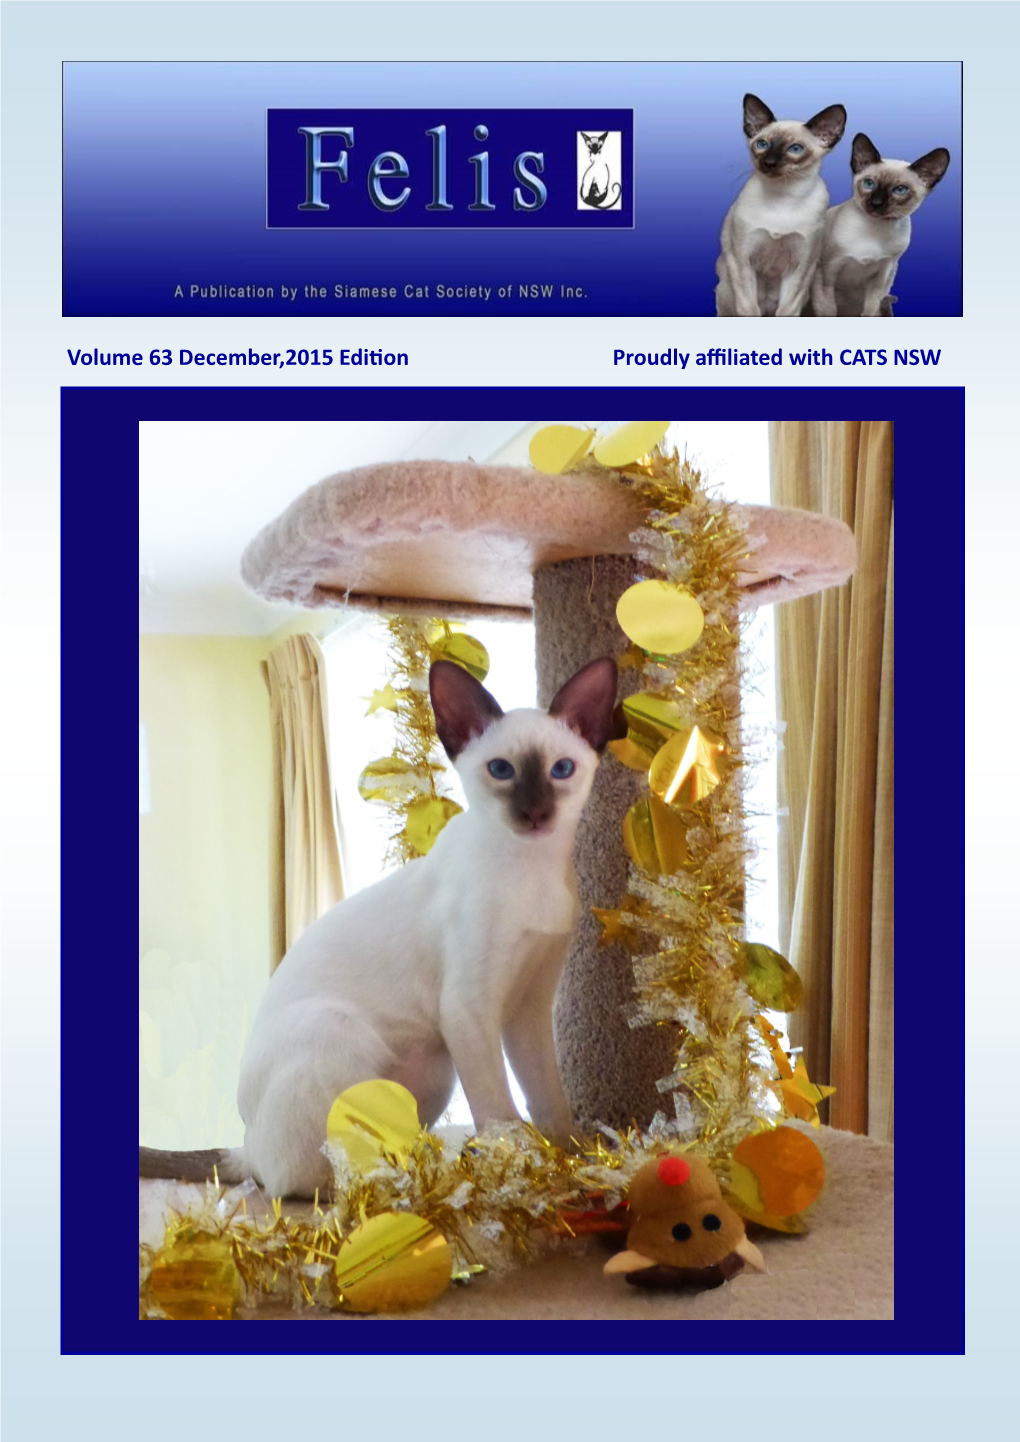 Volume 63 December,2015 Edition Proudly Affiliated with CATS NSW